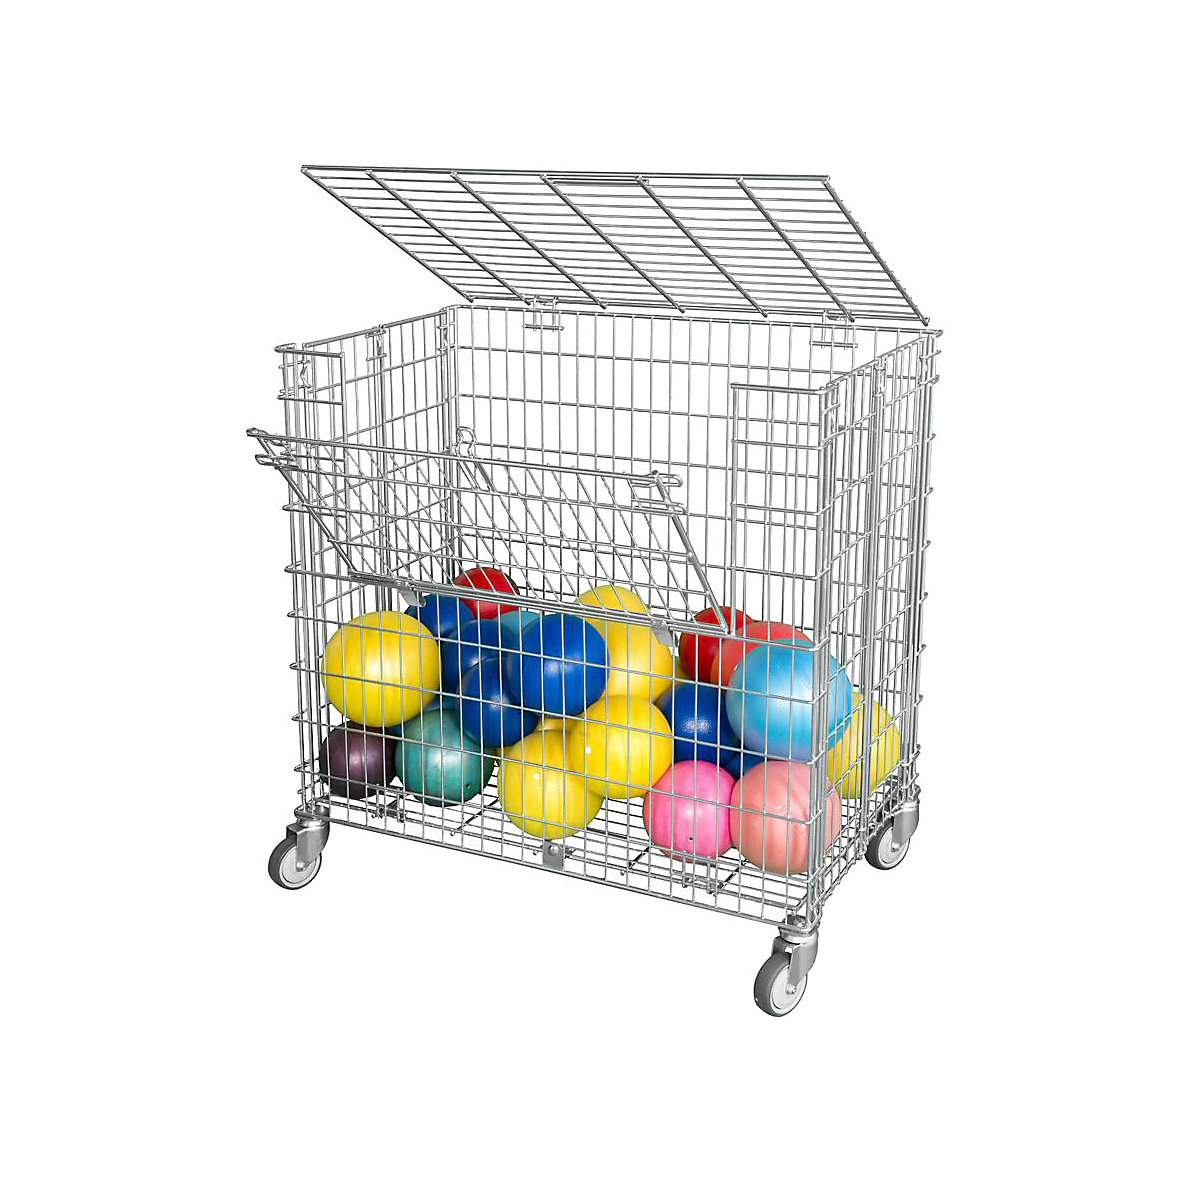 Ball trolley (Product illustration 22)-21